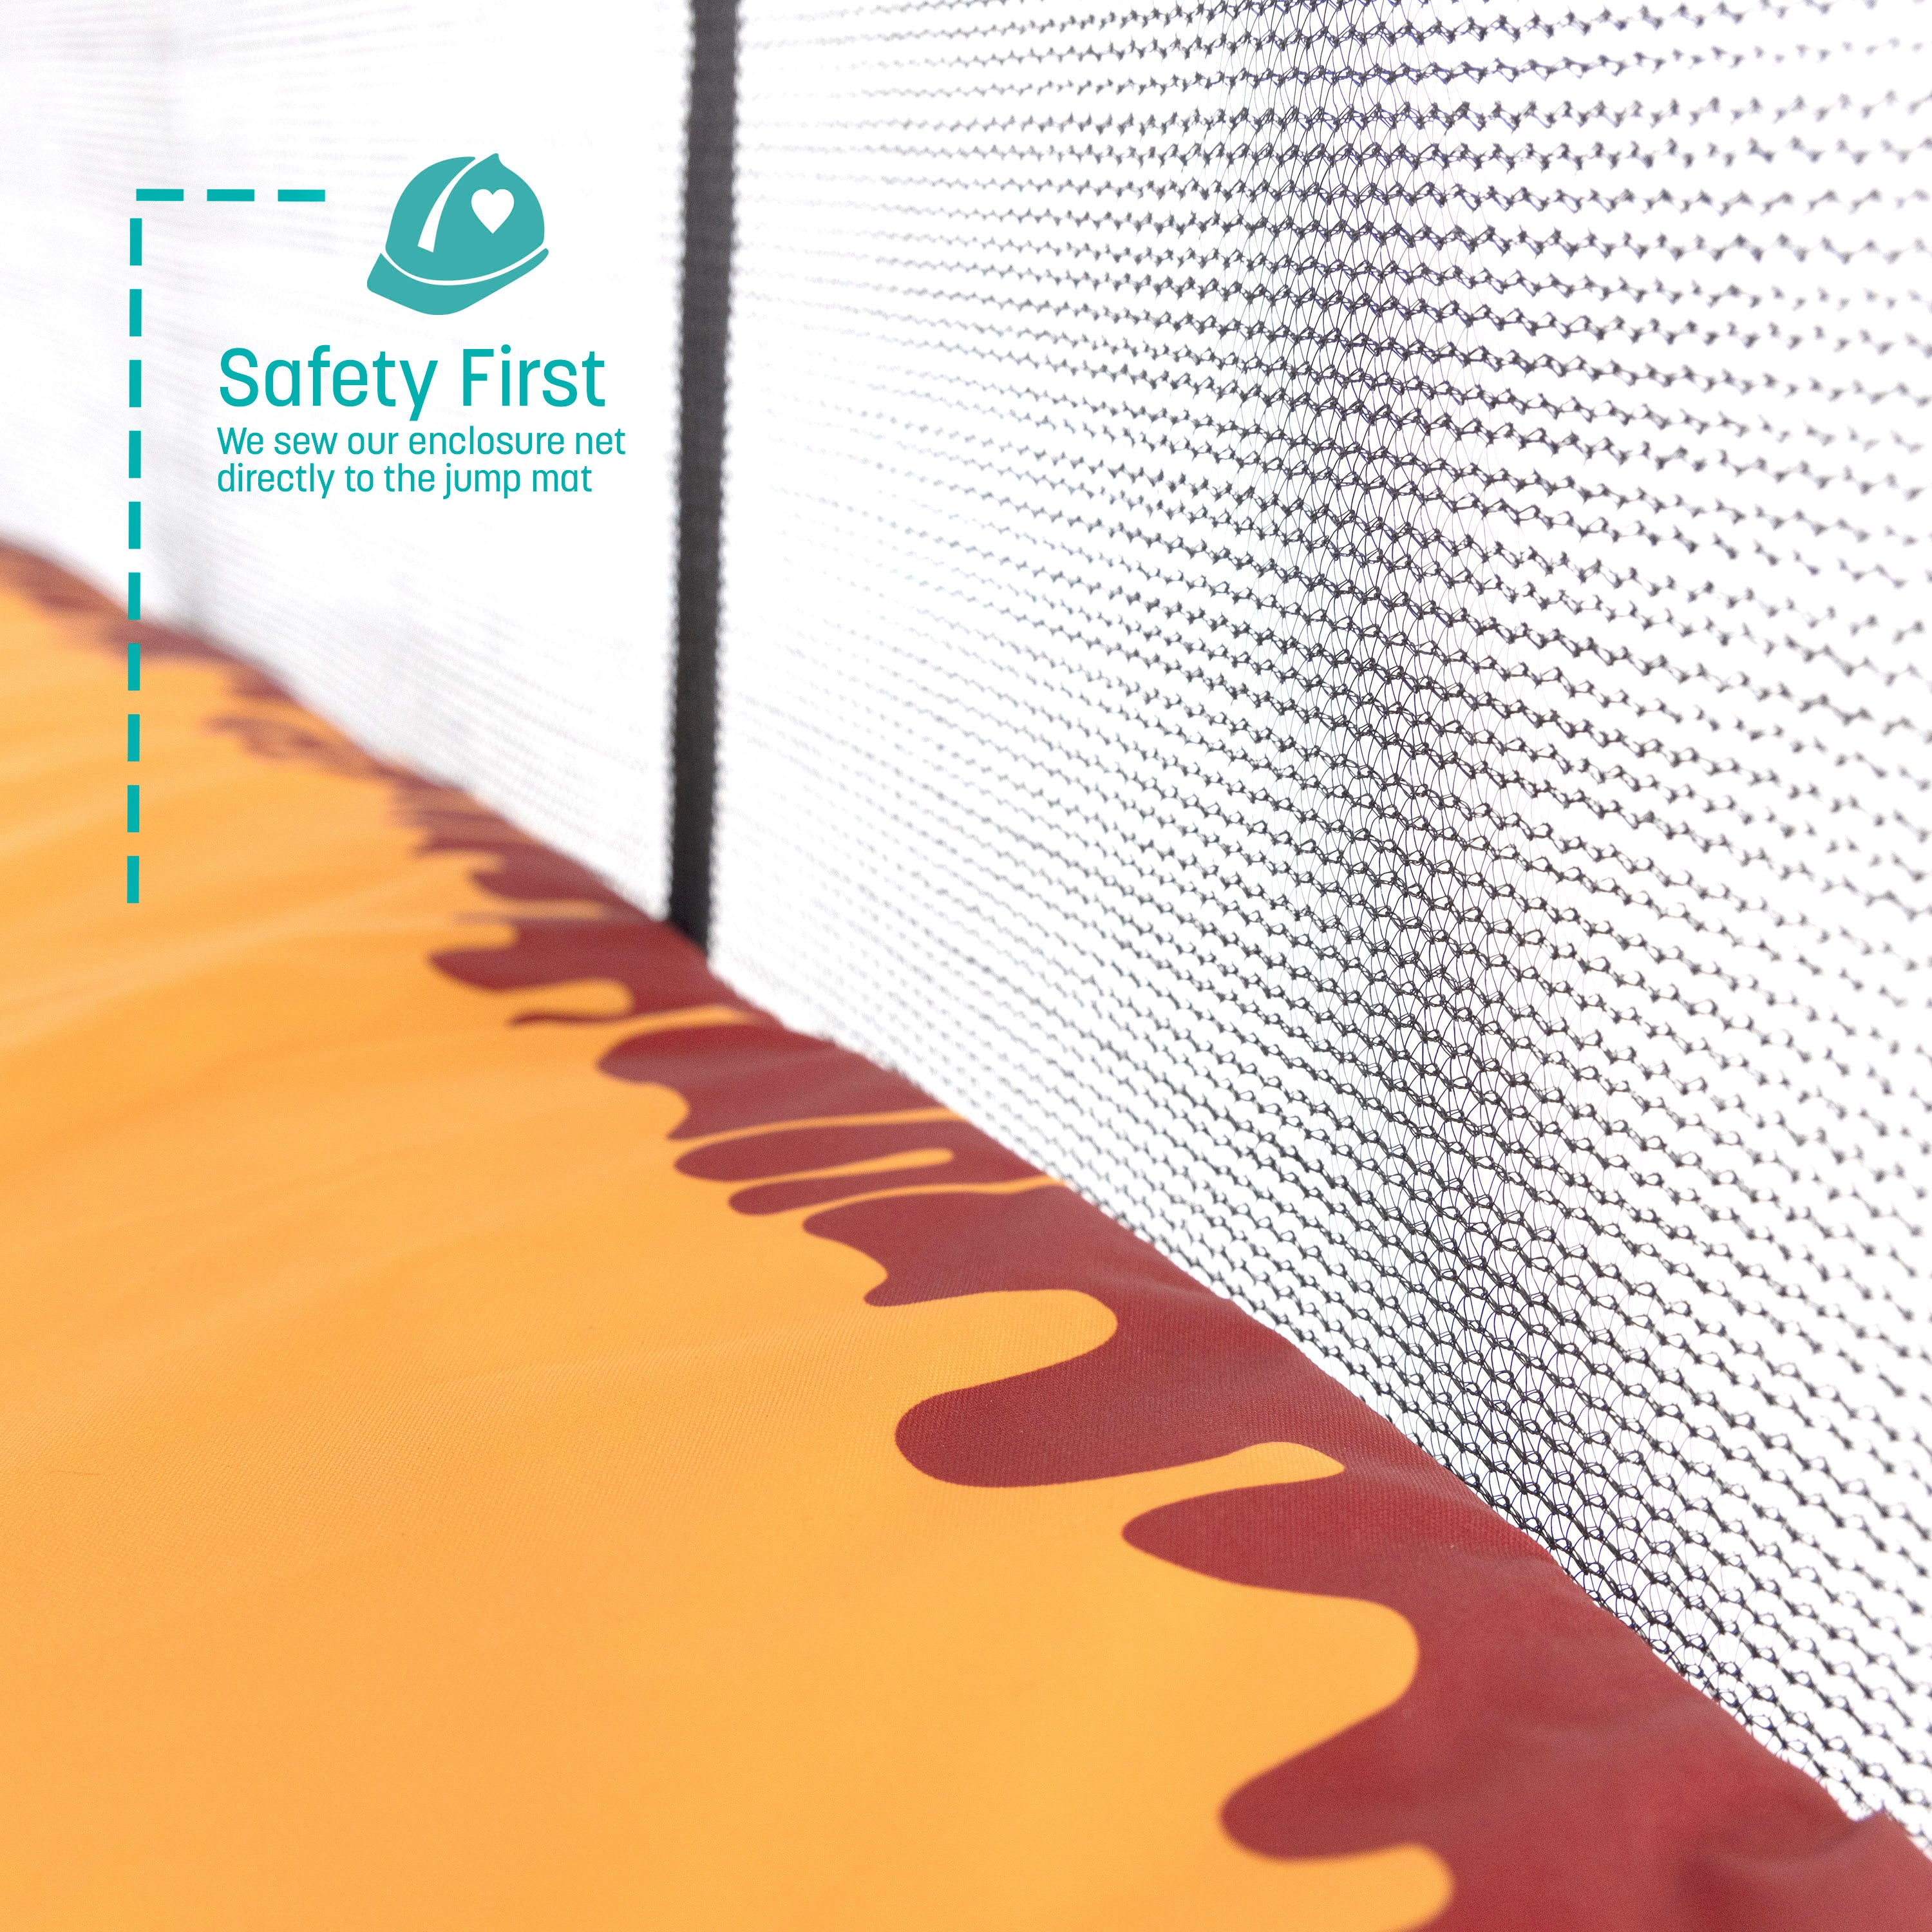 The spring pad has a yellow honey drip design on it. A teal callout feature states, “Safety First: We sew our enclosure net directly to the jump mat”.